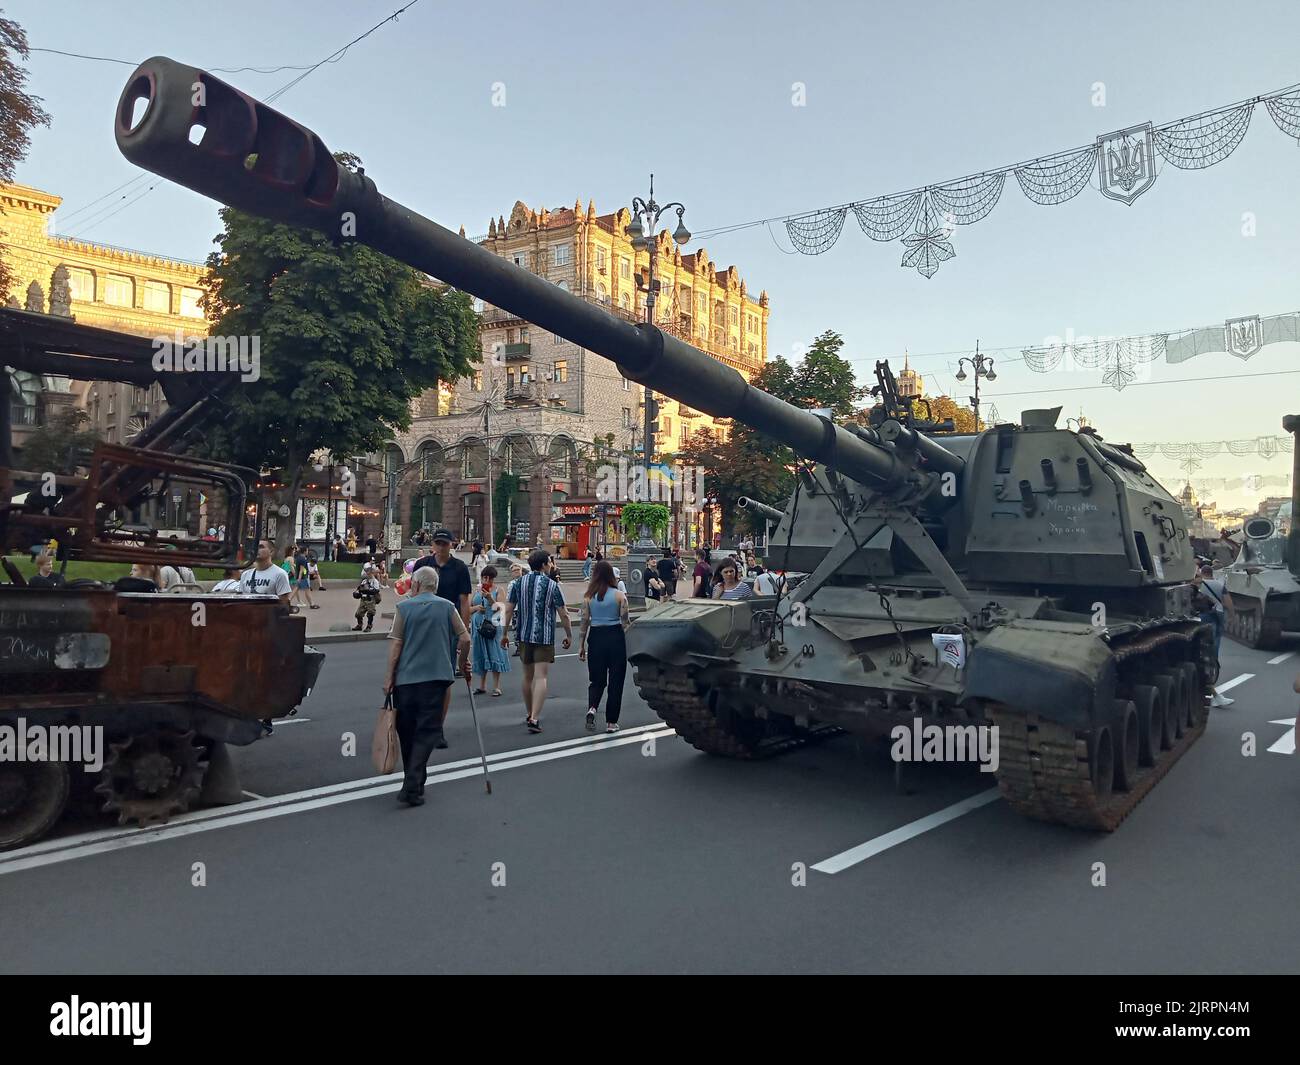 Destroyed military vehicle exhibition on Khreschatyk street on August 24, 2022 during Independence Day in Kiev, Ukraine. Visitors reviewed the broken and burned modern Russian armored cars, tanks etc. Stock Photo